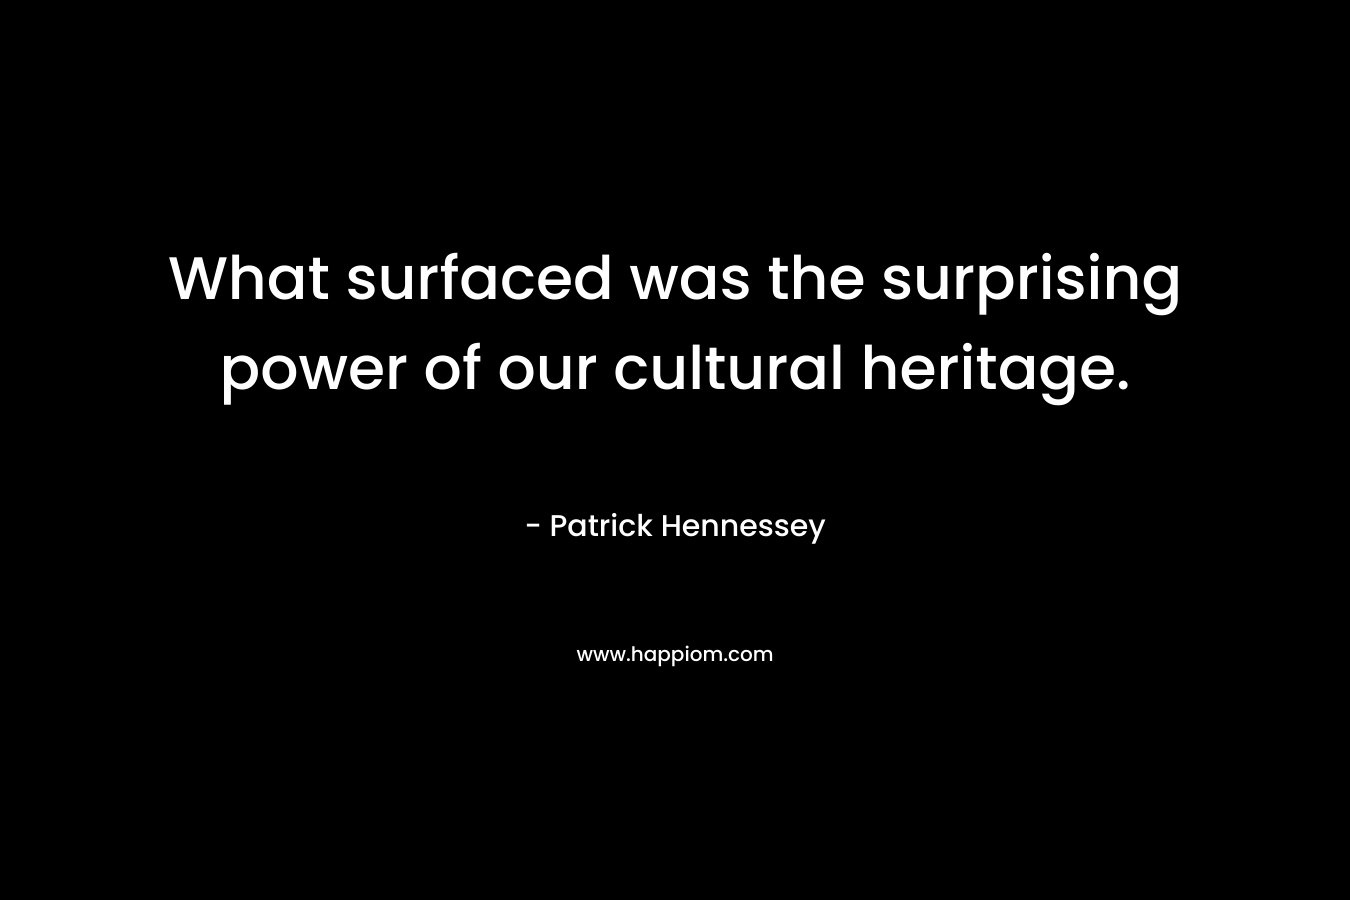 What surfaced was the surprising power of our cultural heritage.